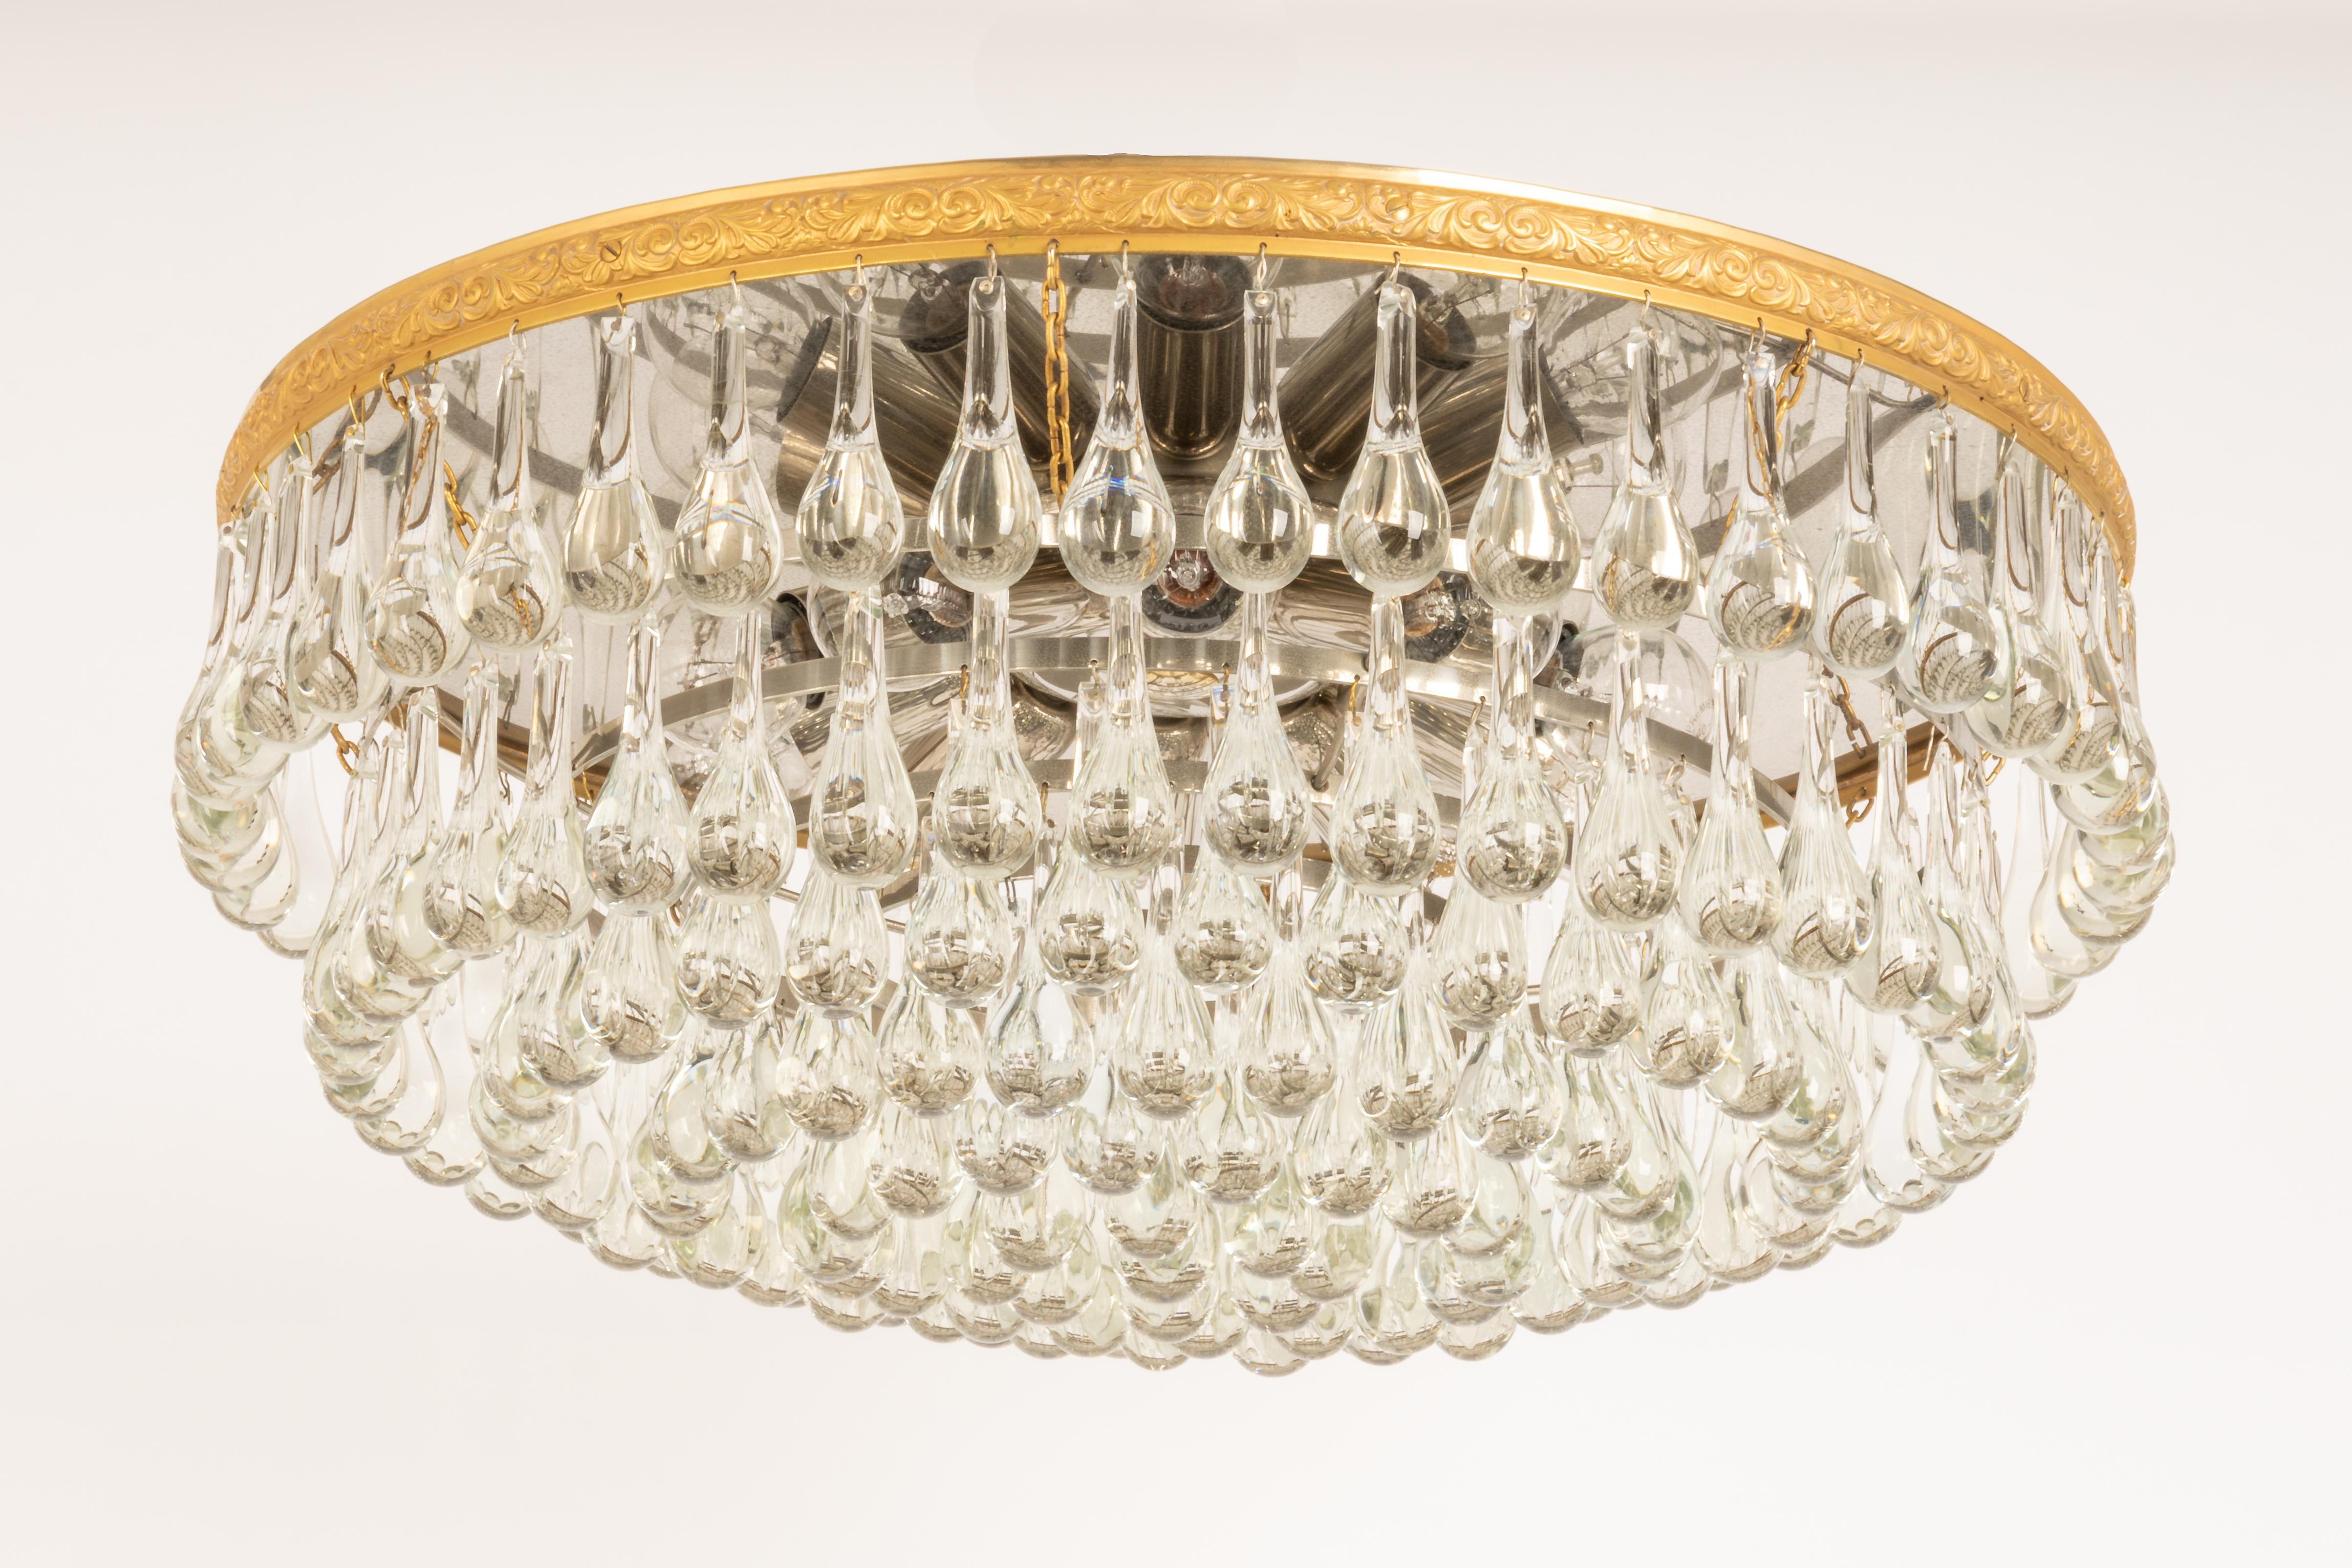 Large Murano Glass Tear Drop Chandelier by C.Palme, Germany, 1970s For Sale 3